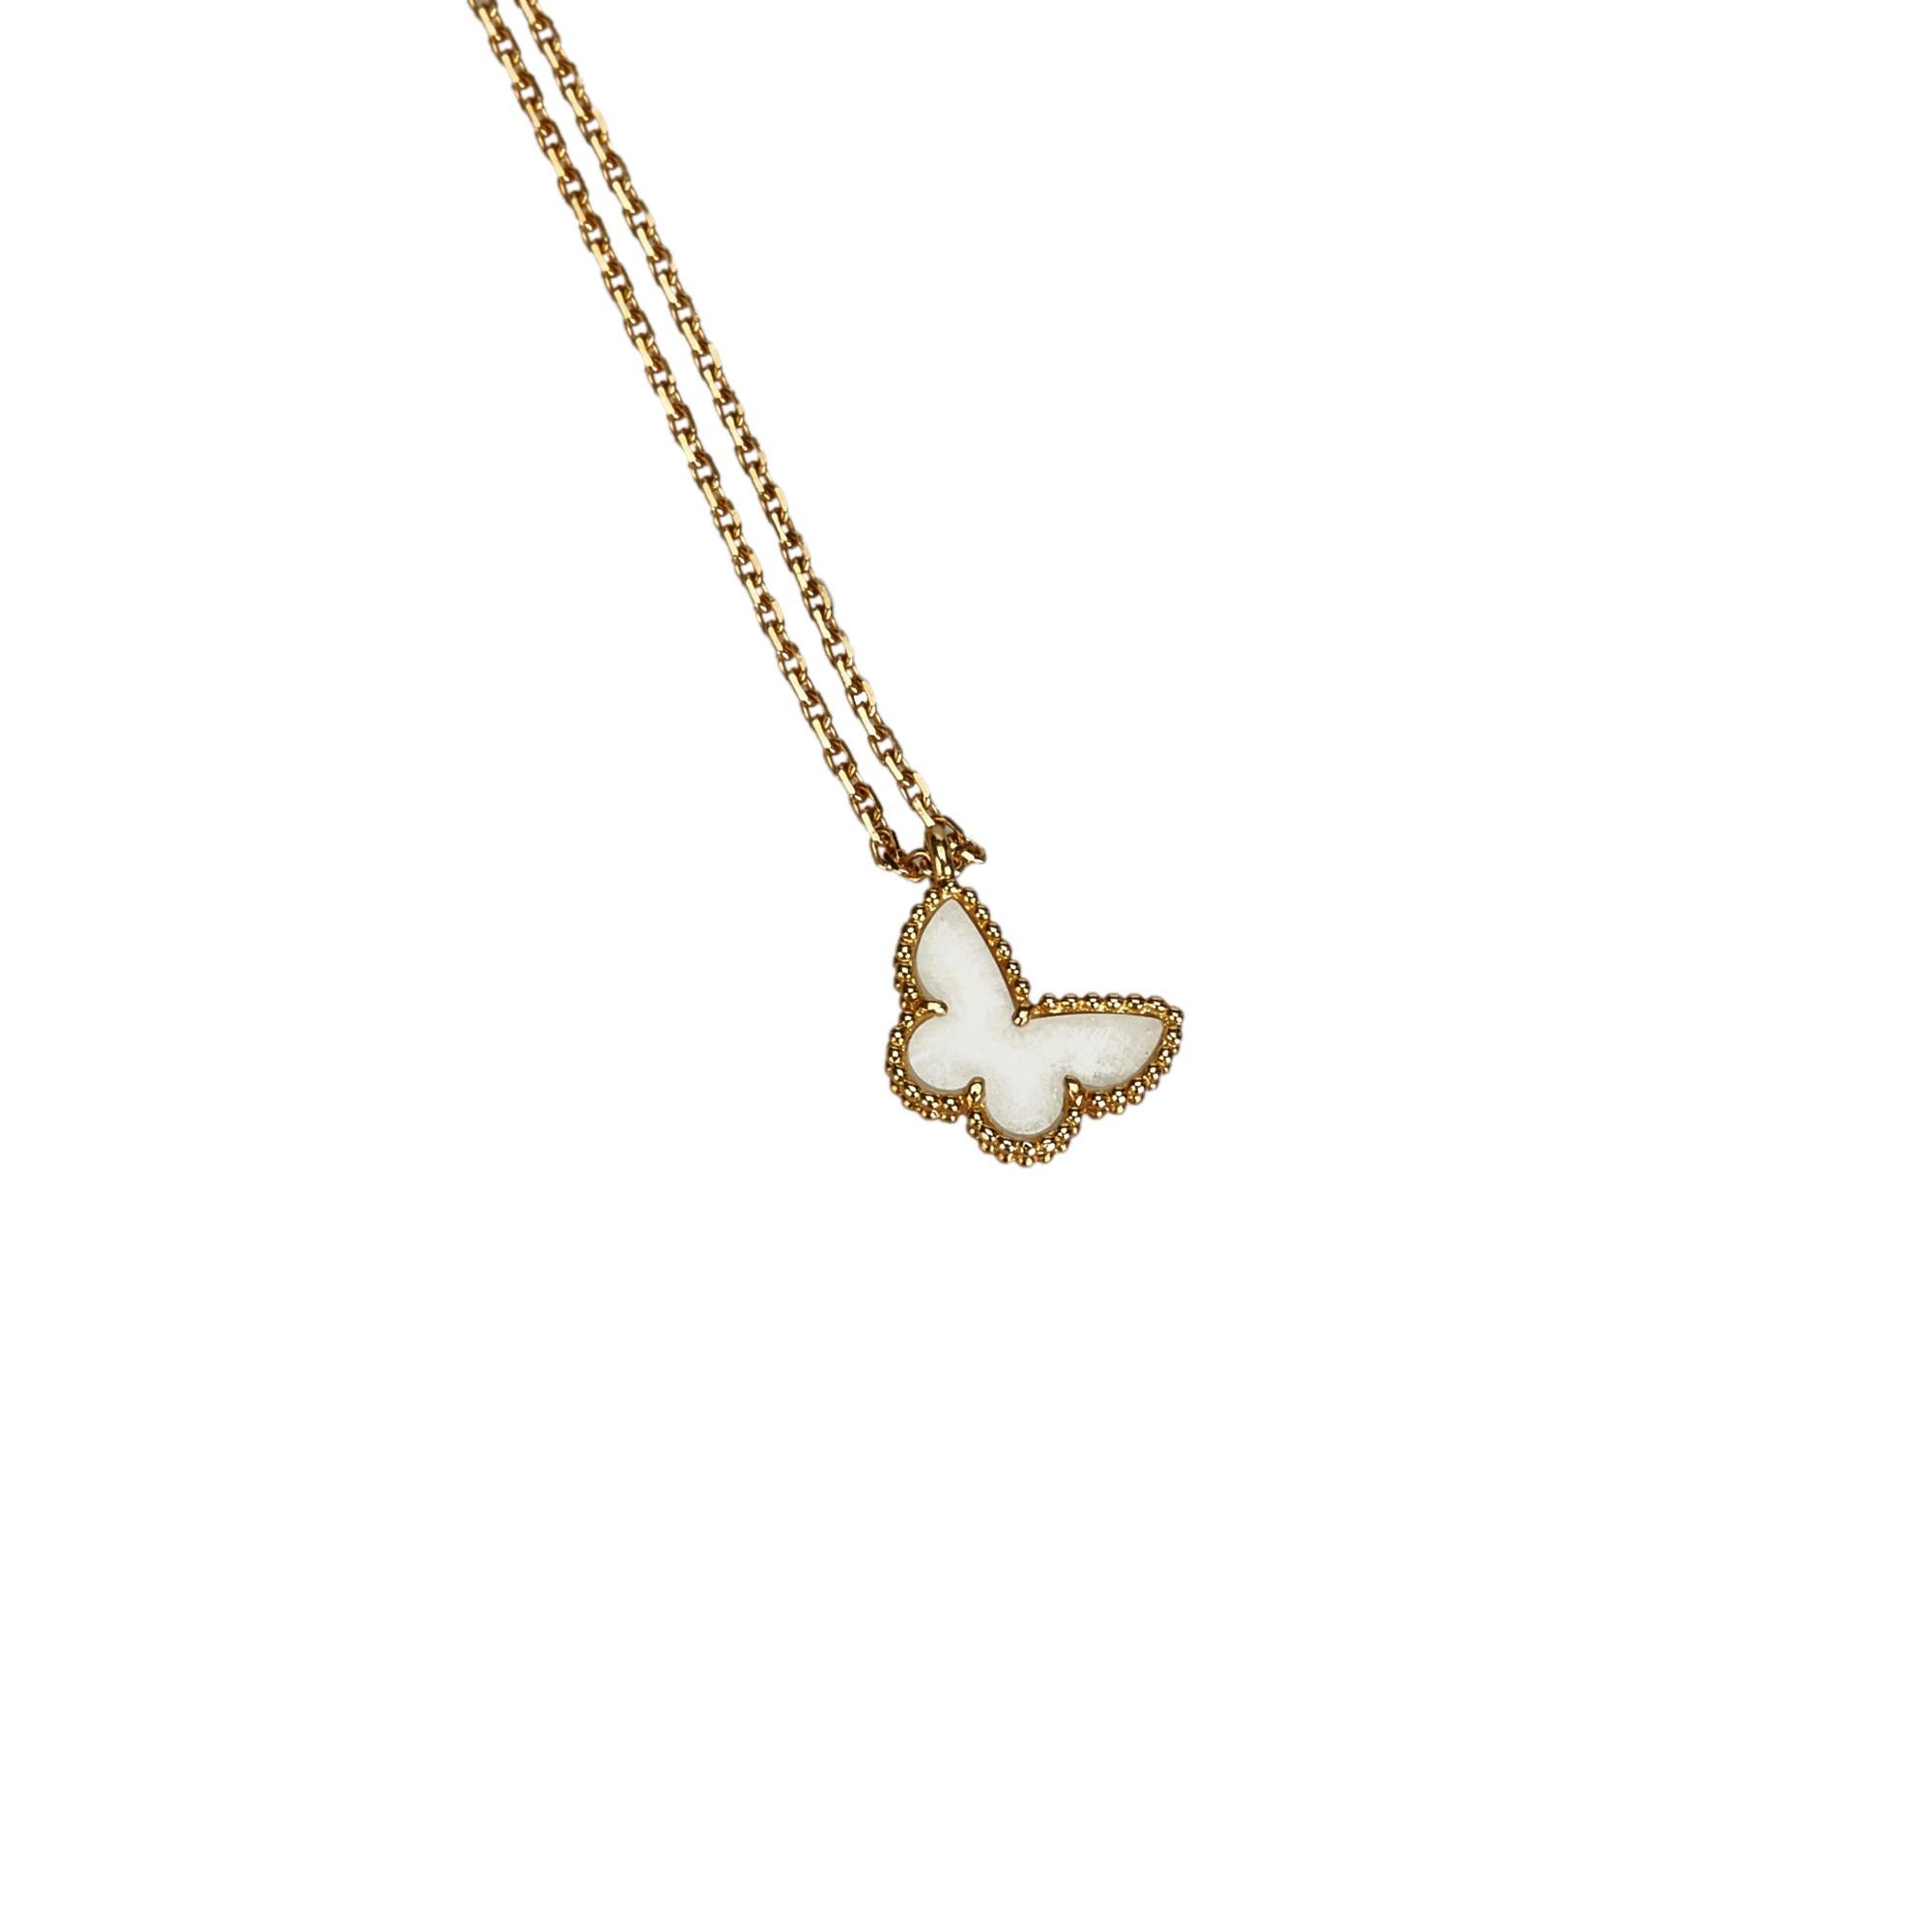 VanCleef and Arpels Mother of Pearl Sweet Alhambra Butterfly Pendant Necklace

The Sweet Alhambra Butterfly Pendant necklace features an 18k Yellow Gold chain, mother of pearl pendant, and a lobster claw closure. 

Approx. 1cm x 1cm